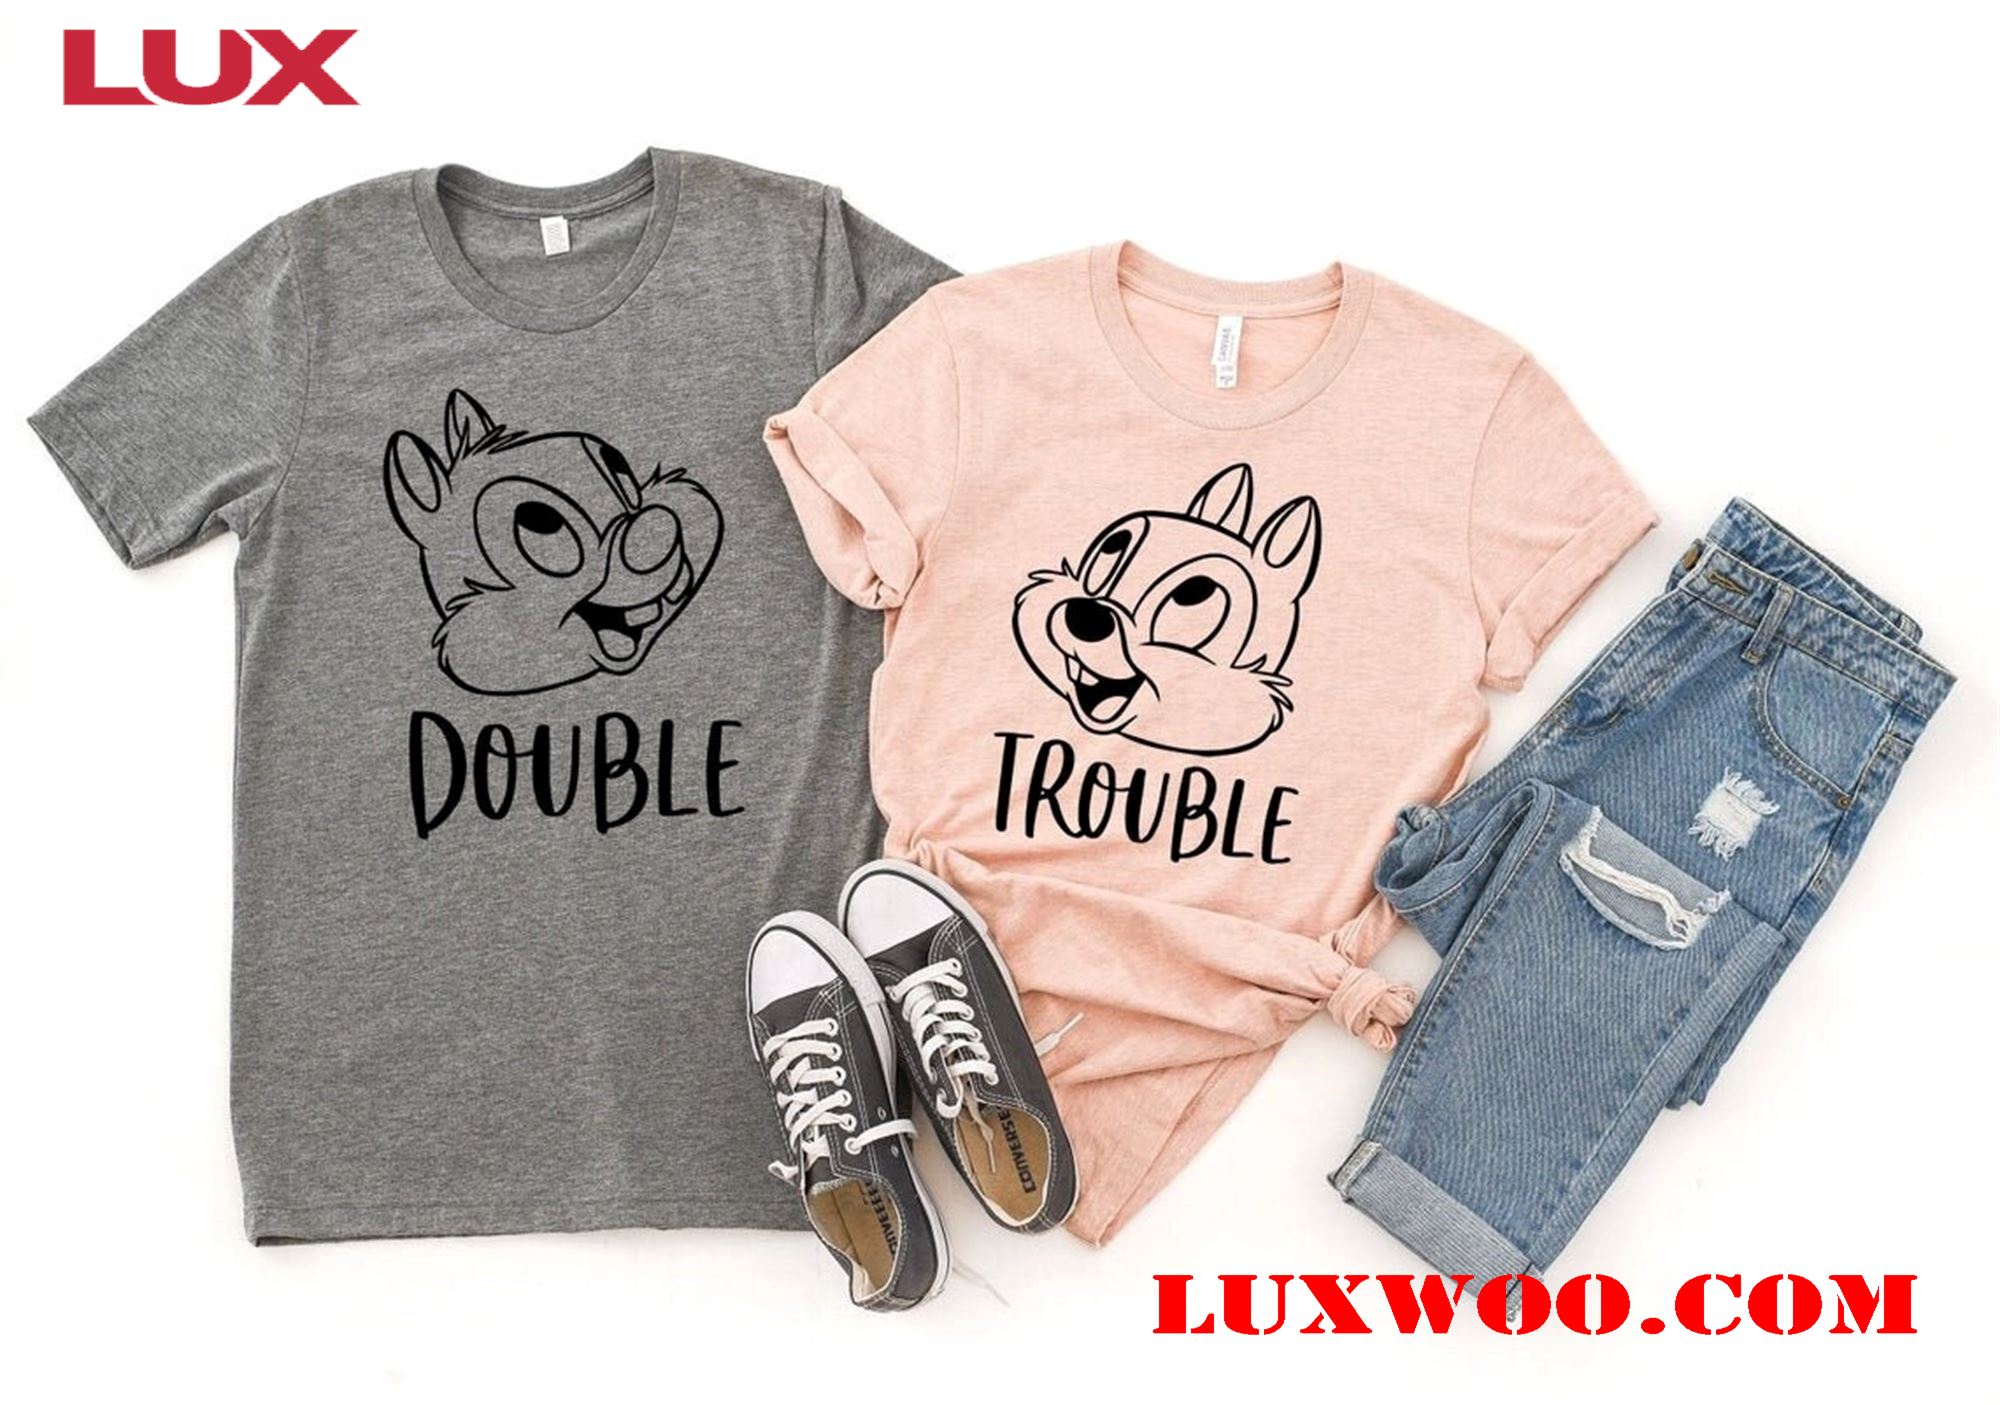 Chip And Dale Kids Disney Shirts Disney Couple Shirt Double And Trouble Disneyworld Shirts Family 